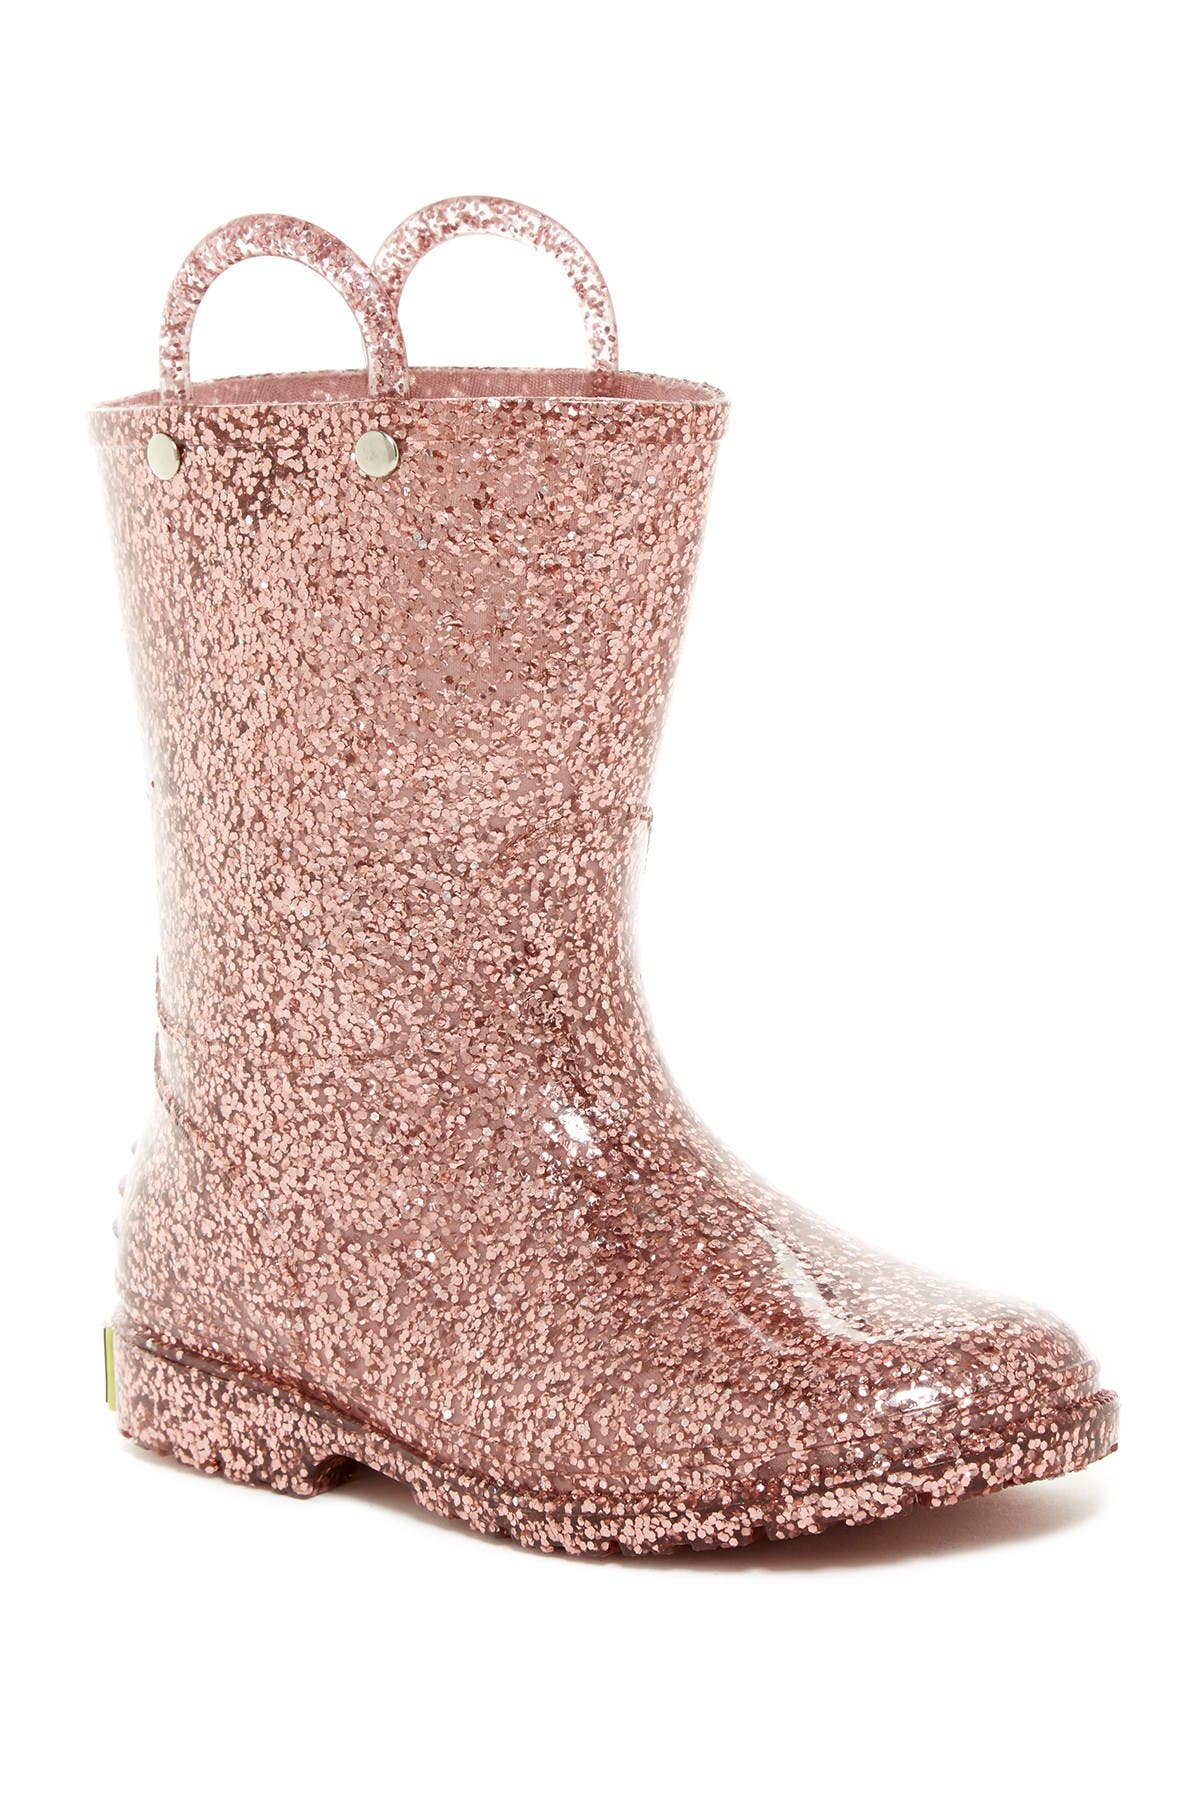 kids sparkly boots